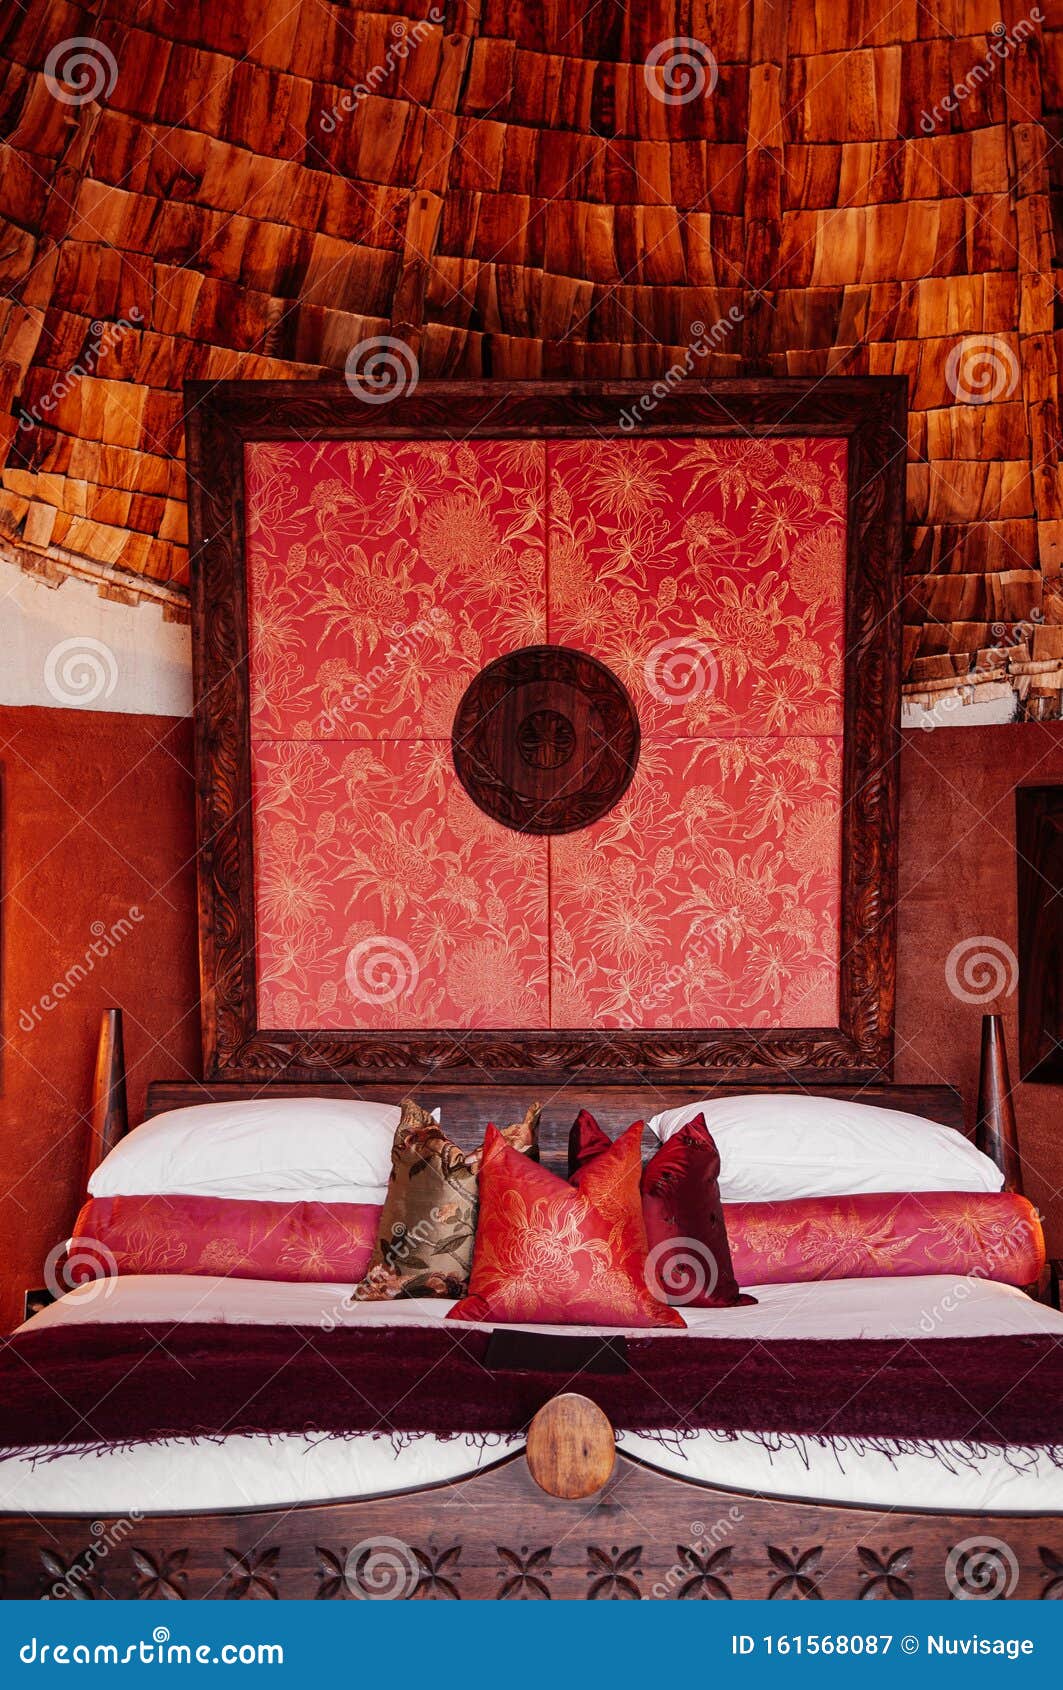 Luxury African Tribal Hut Bedroom Interior with Old Vintage Wooden ...